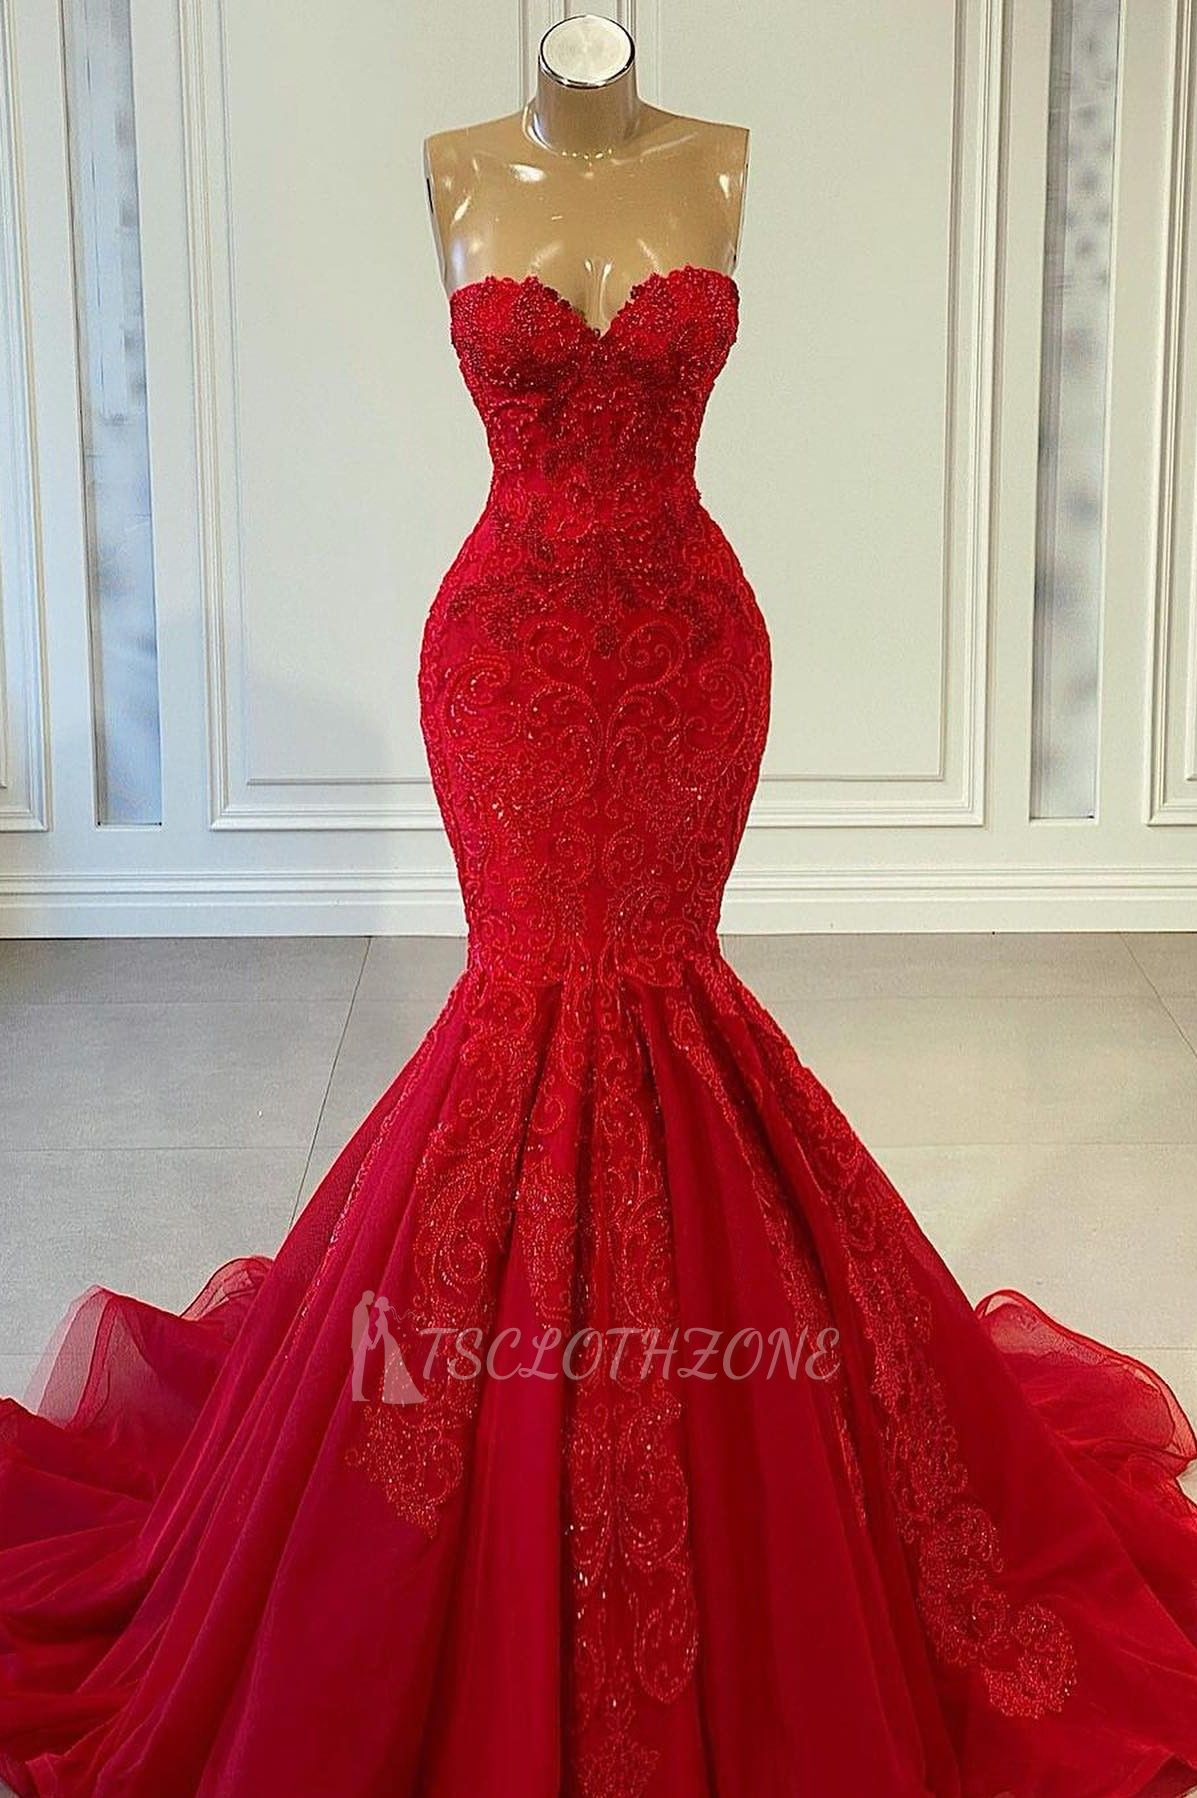 Luxurious Red Lace Long Mermaid Ball Dress｜Lace Evening Dress